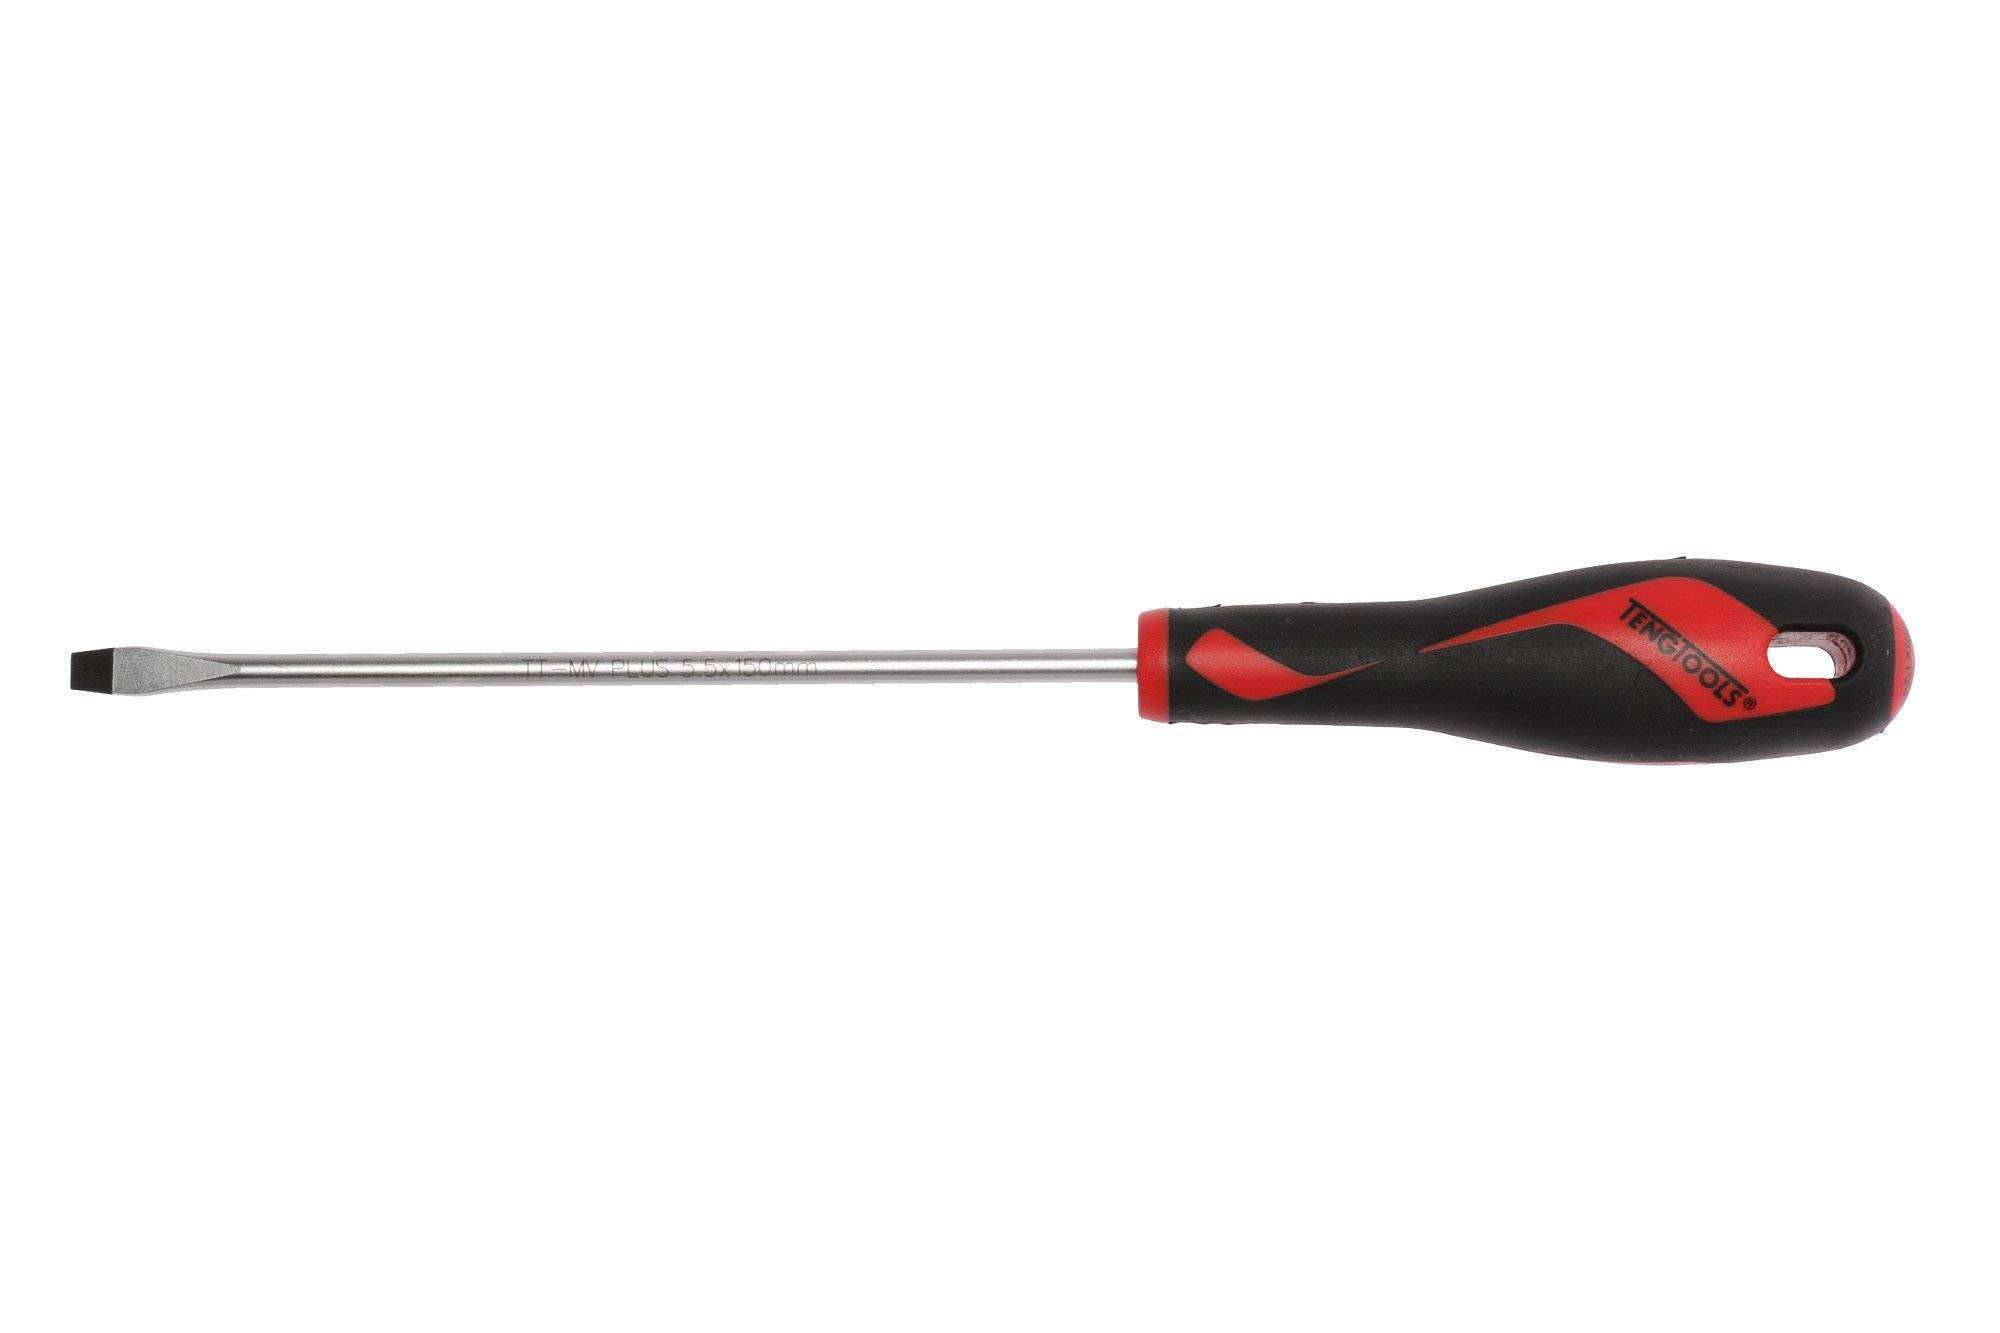 Teng Tools 5.5mm / 7/32 Inch X 150mm / 5.9 Inch Long Flat Type Slotted Head Screwdriver - MD923N